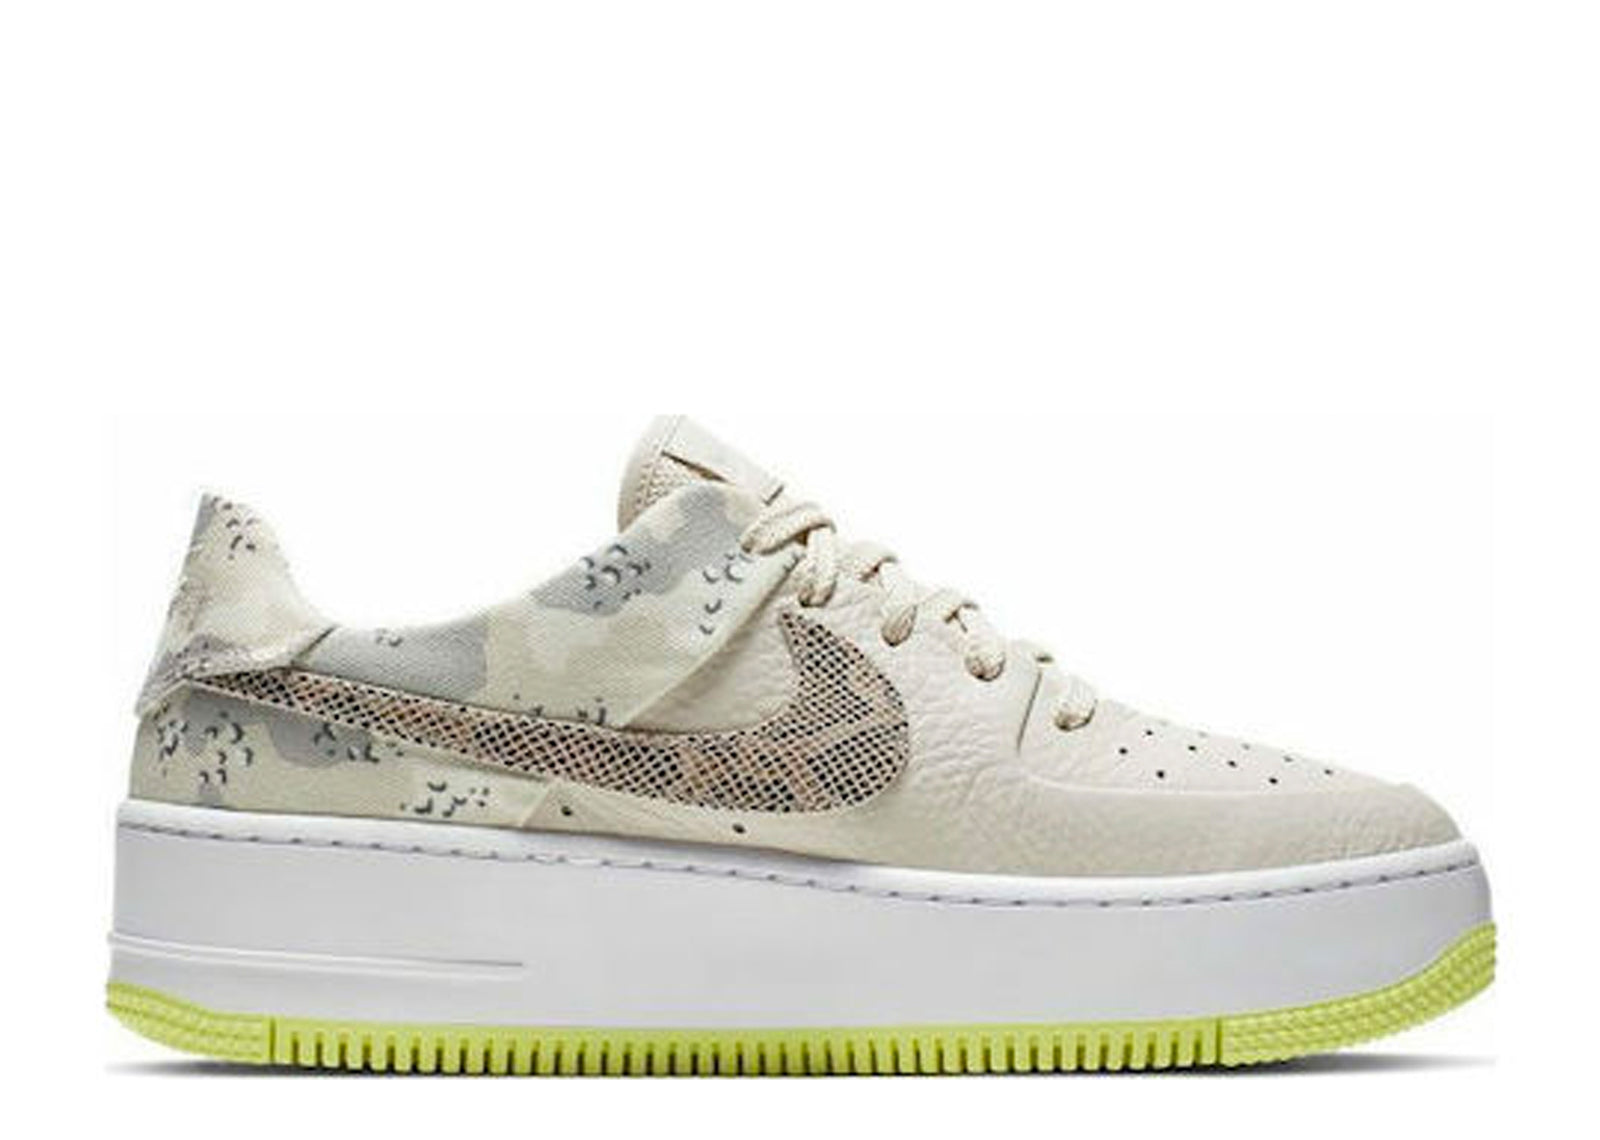 Second Chance - free Nike Air Force 1 Sage Low Orewood Camo - 42 | NEW